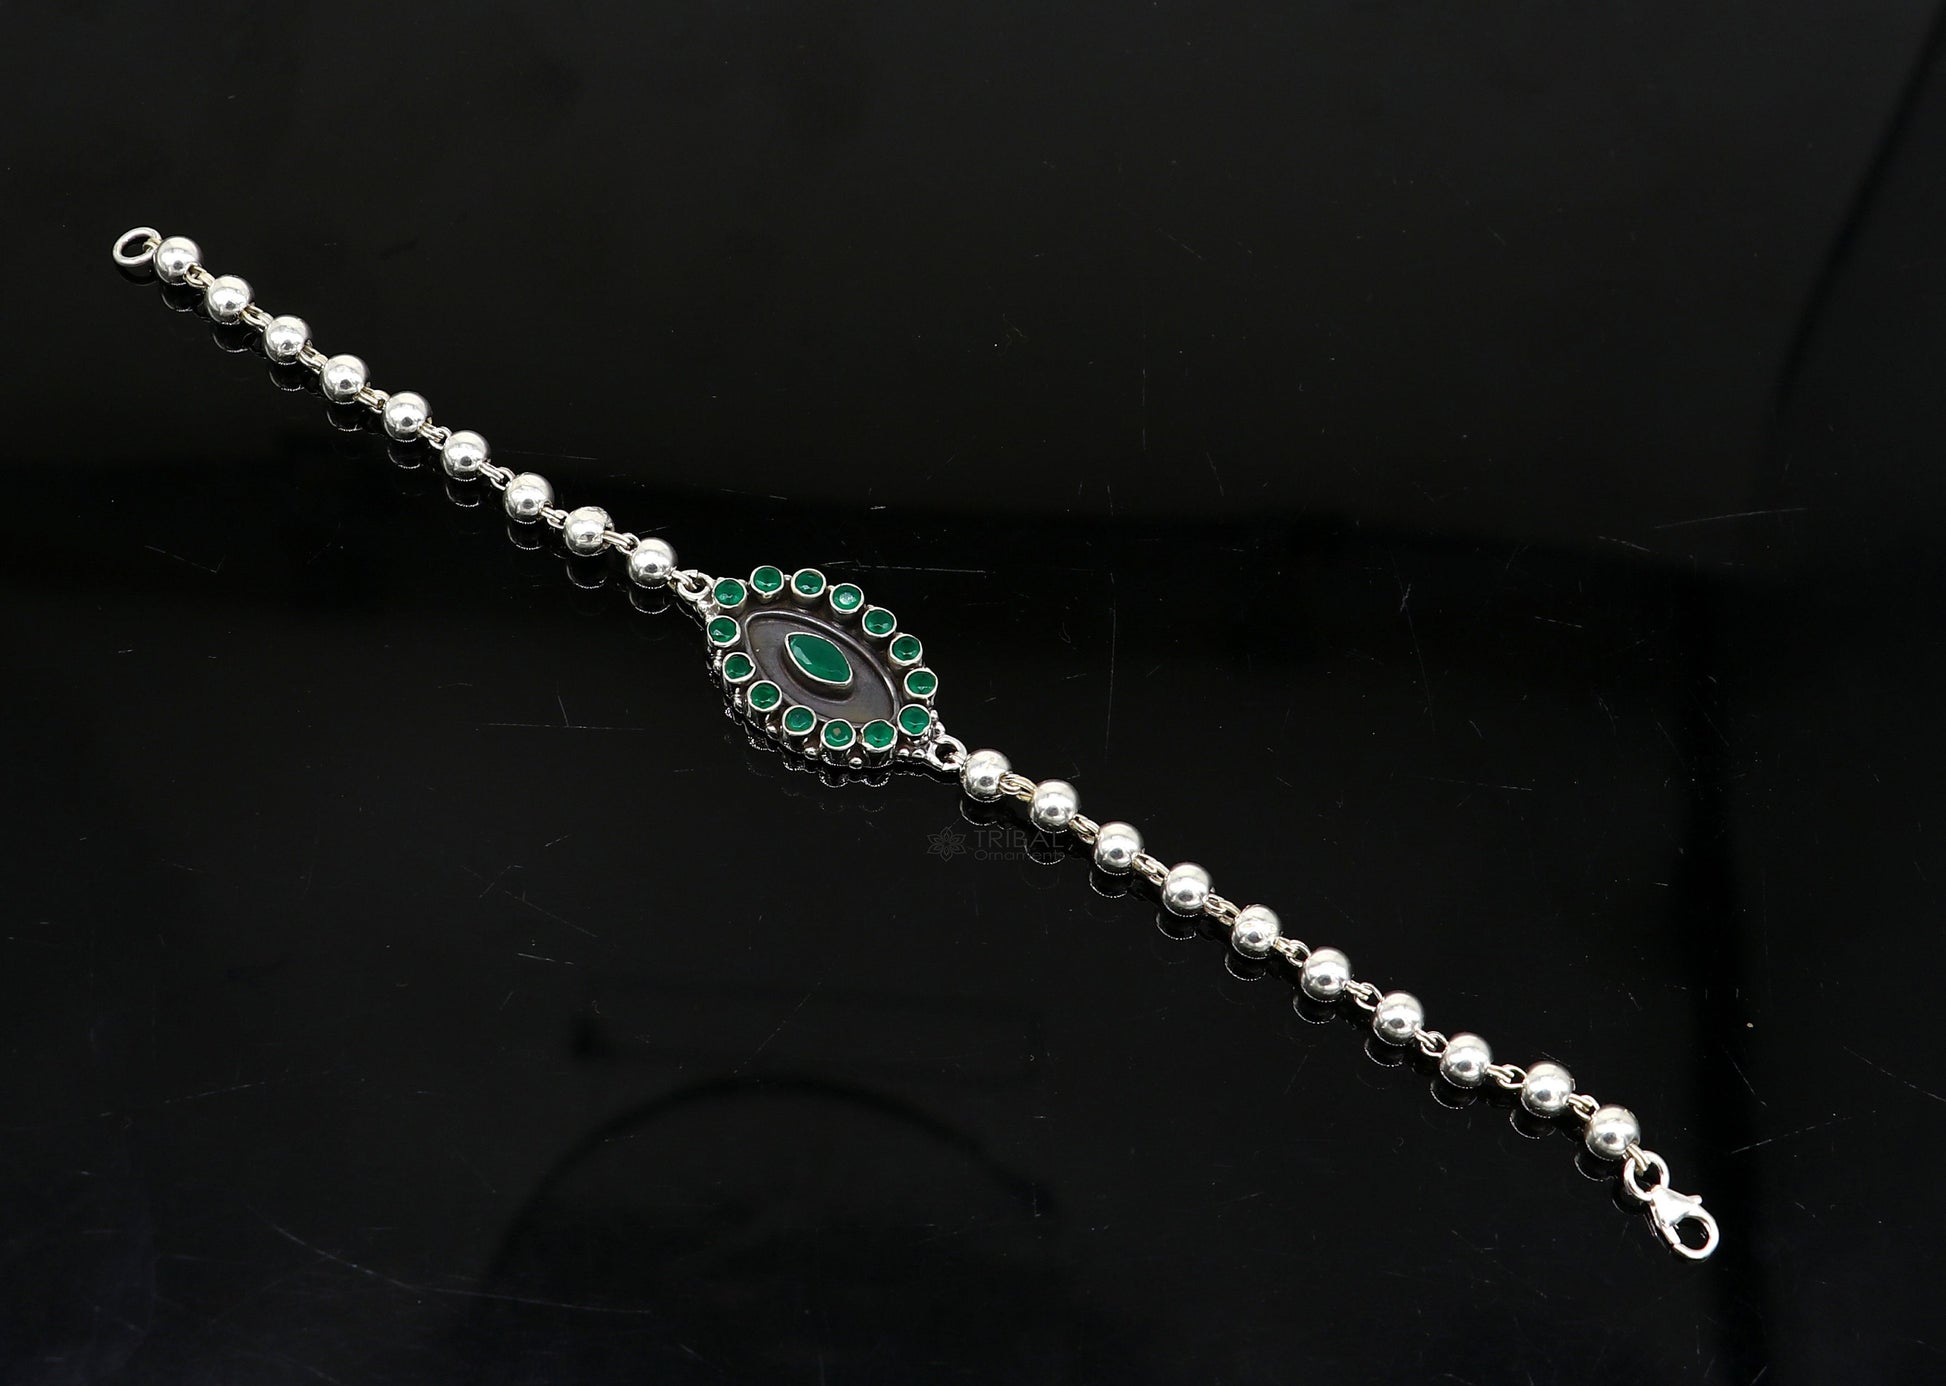 925 Sterling silver customized beaded bracelet with green color stone pendant. best gift for your special person unisex jewelry sbr678 - TRIBAL ORNAMENTS